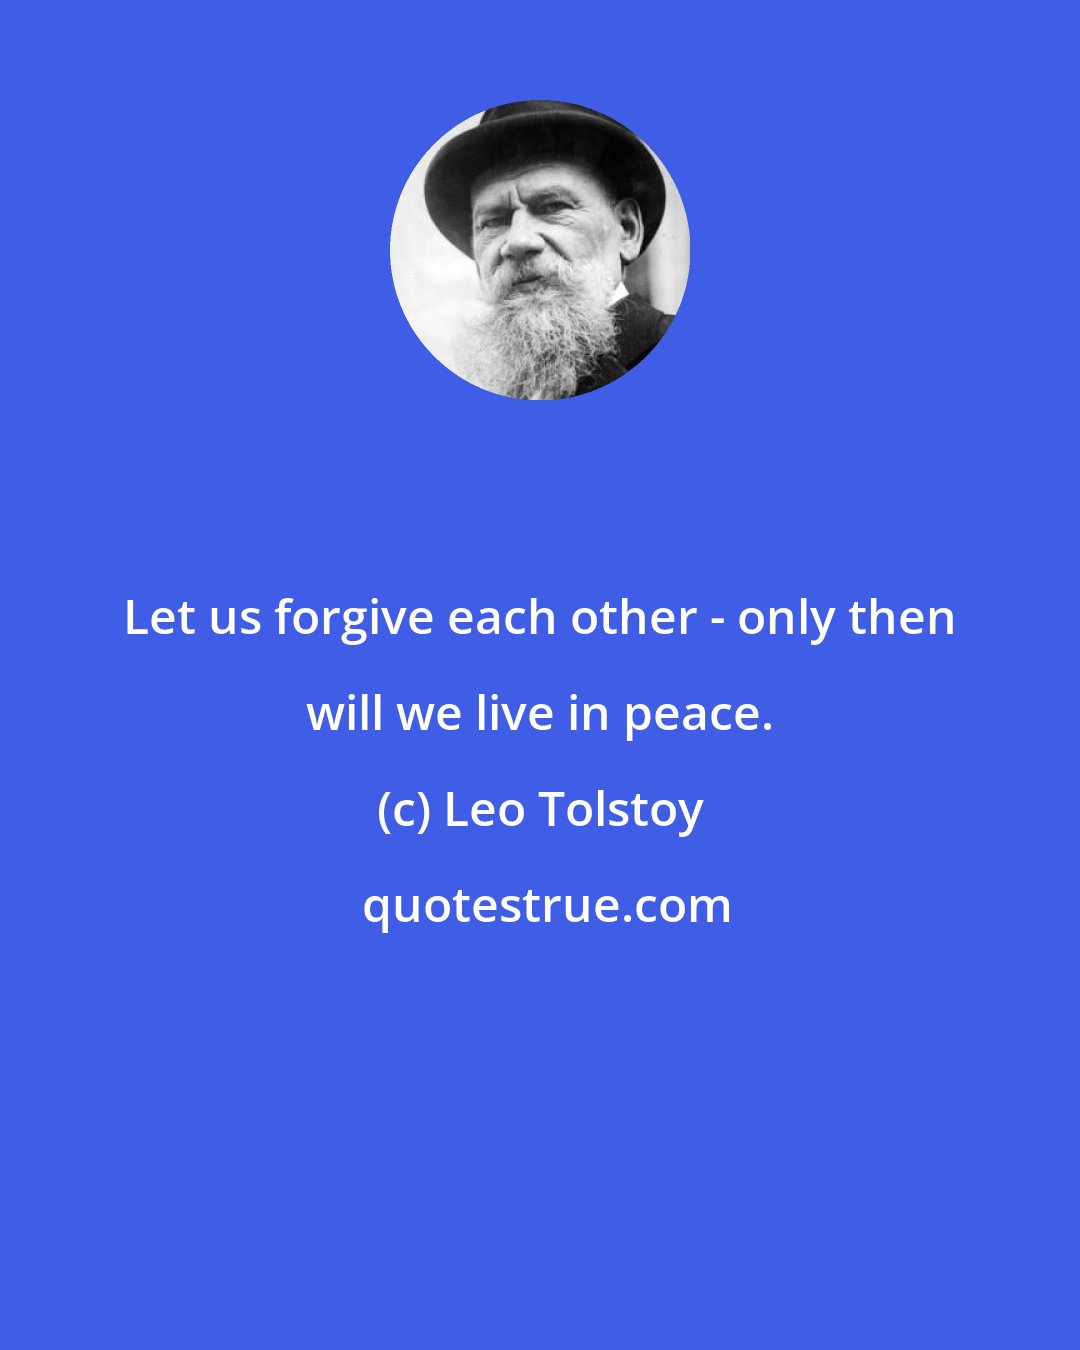 Leo Tolstoy: Let us forgive each other - only then will we live in peace.